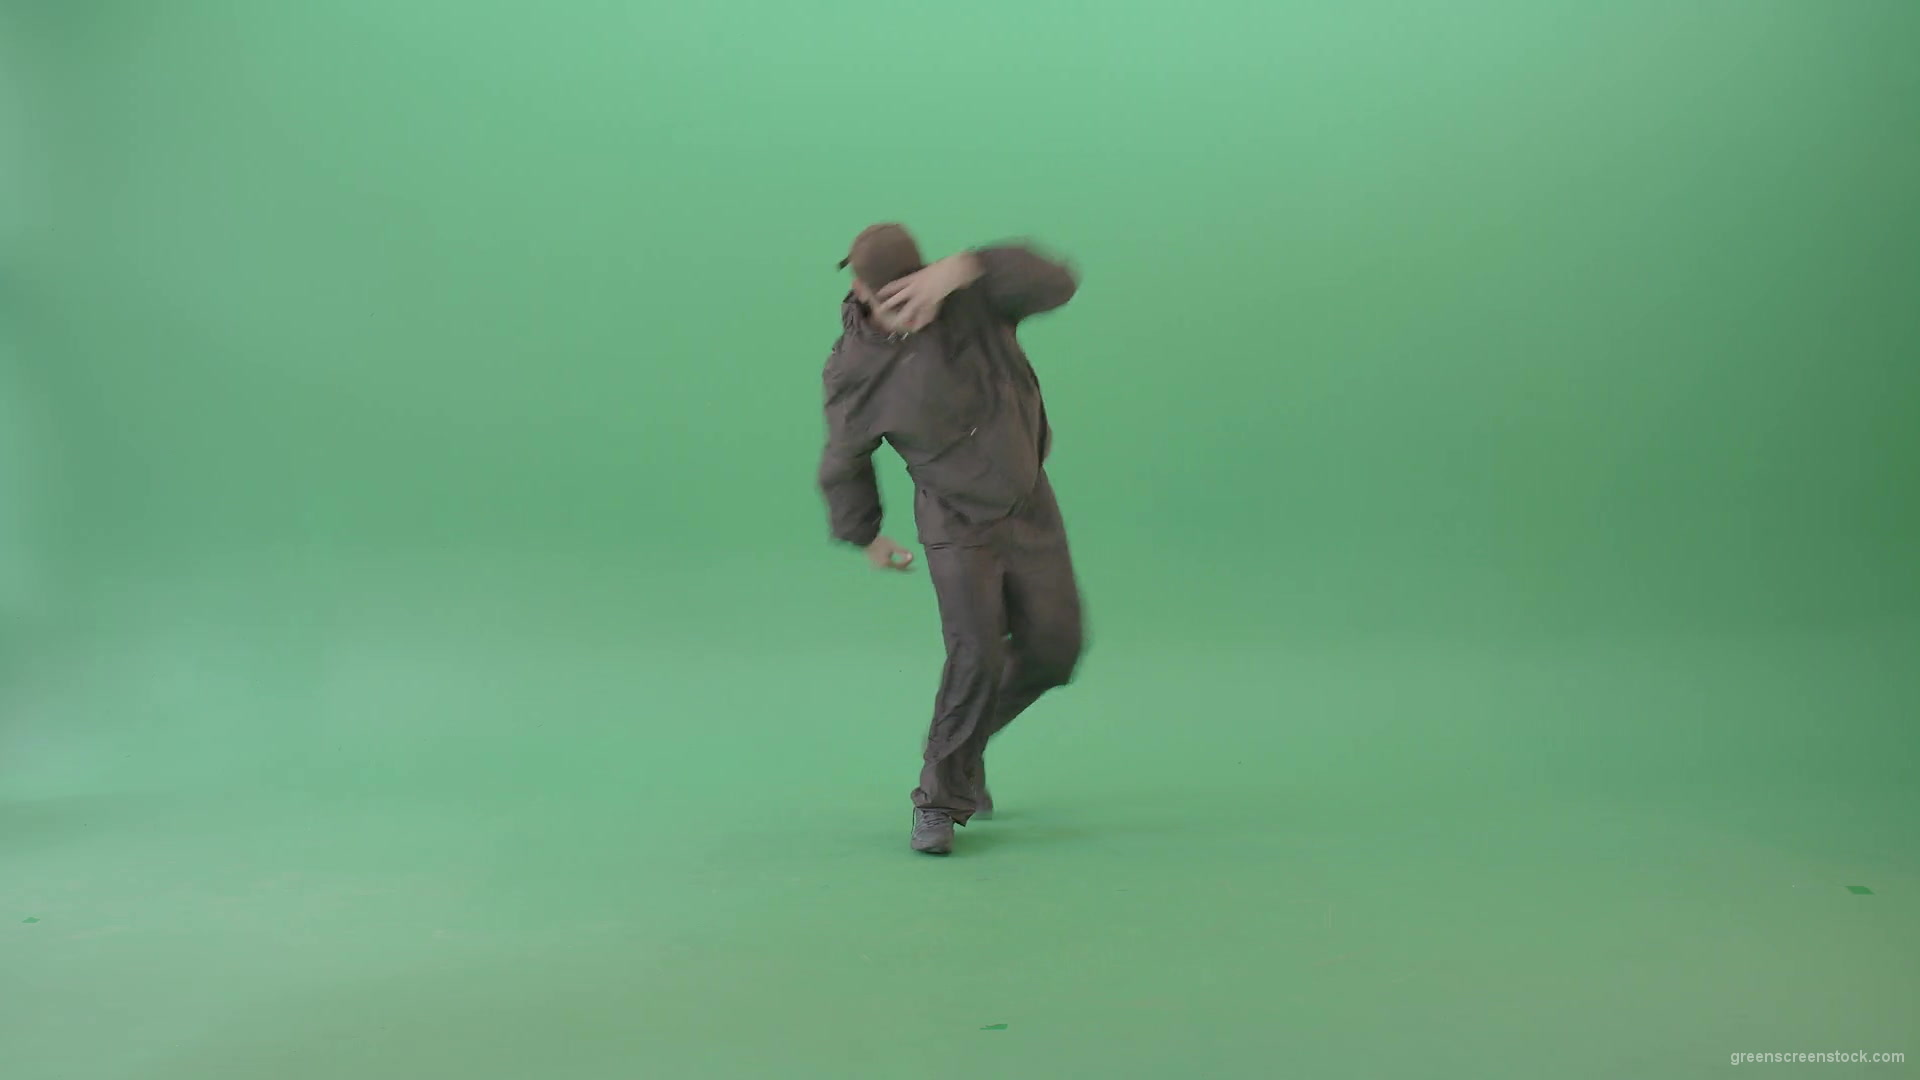 B-Boy-making-gymnastic-break-dance-for-advertising-isolated-on-green-screen-4K-Video-Footage-1920_007 Green Screen Stock